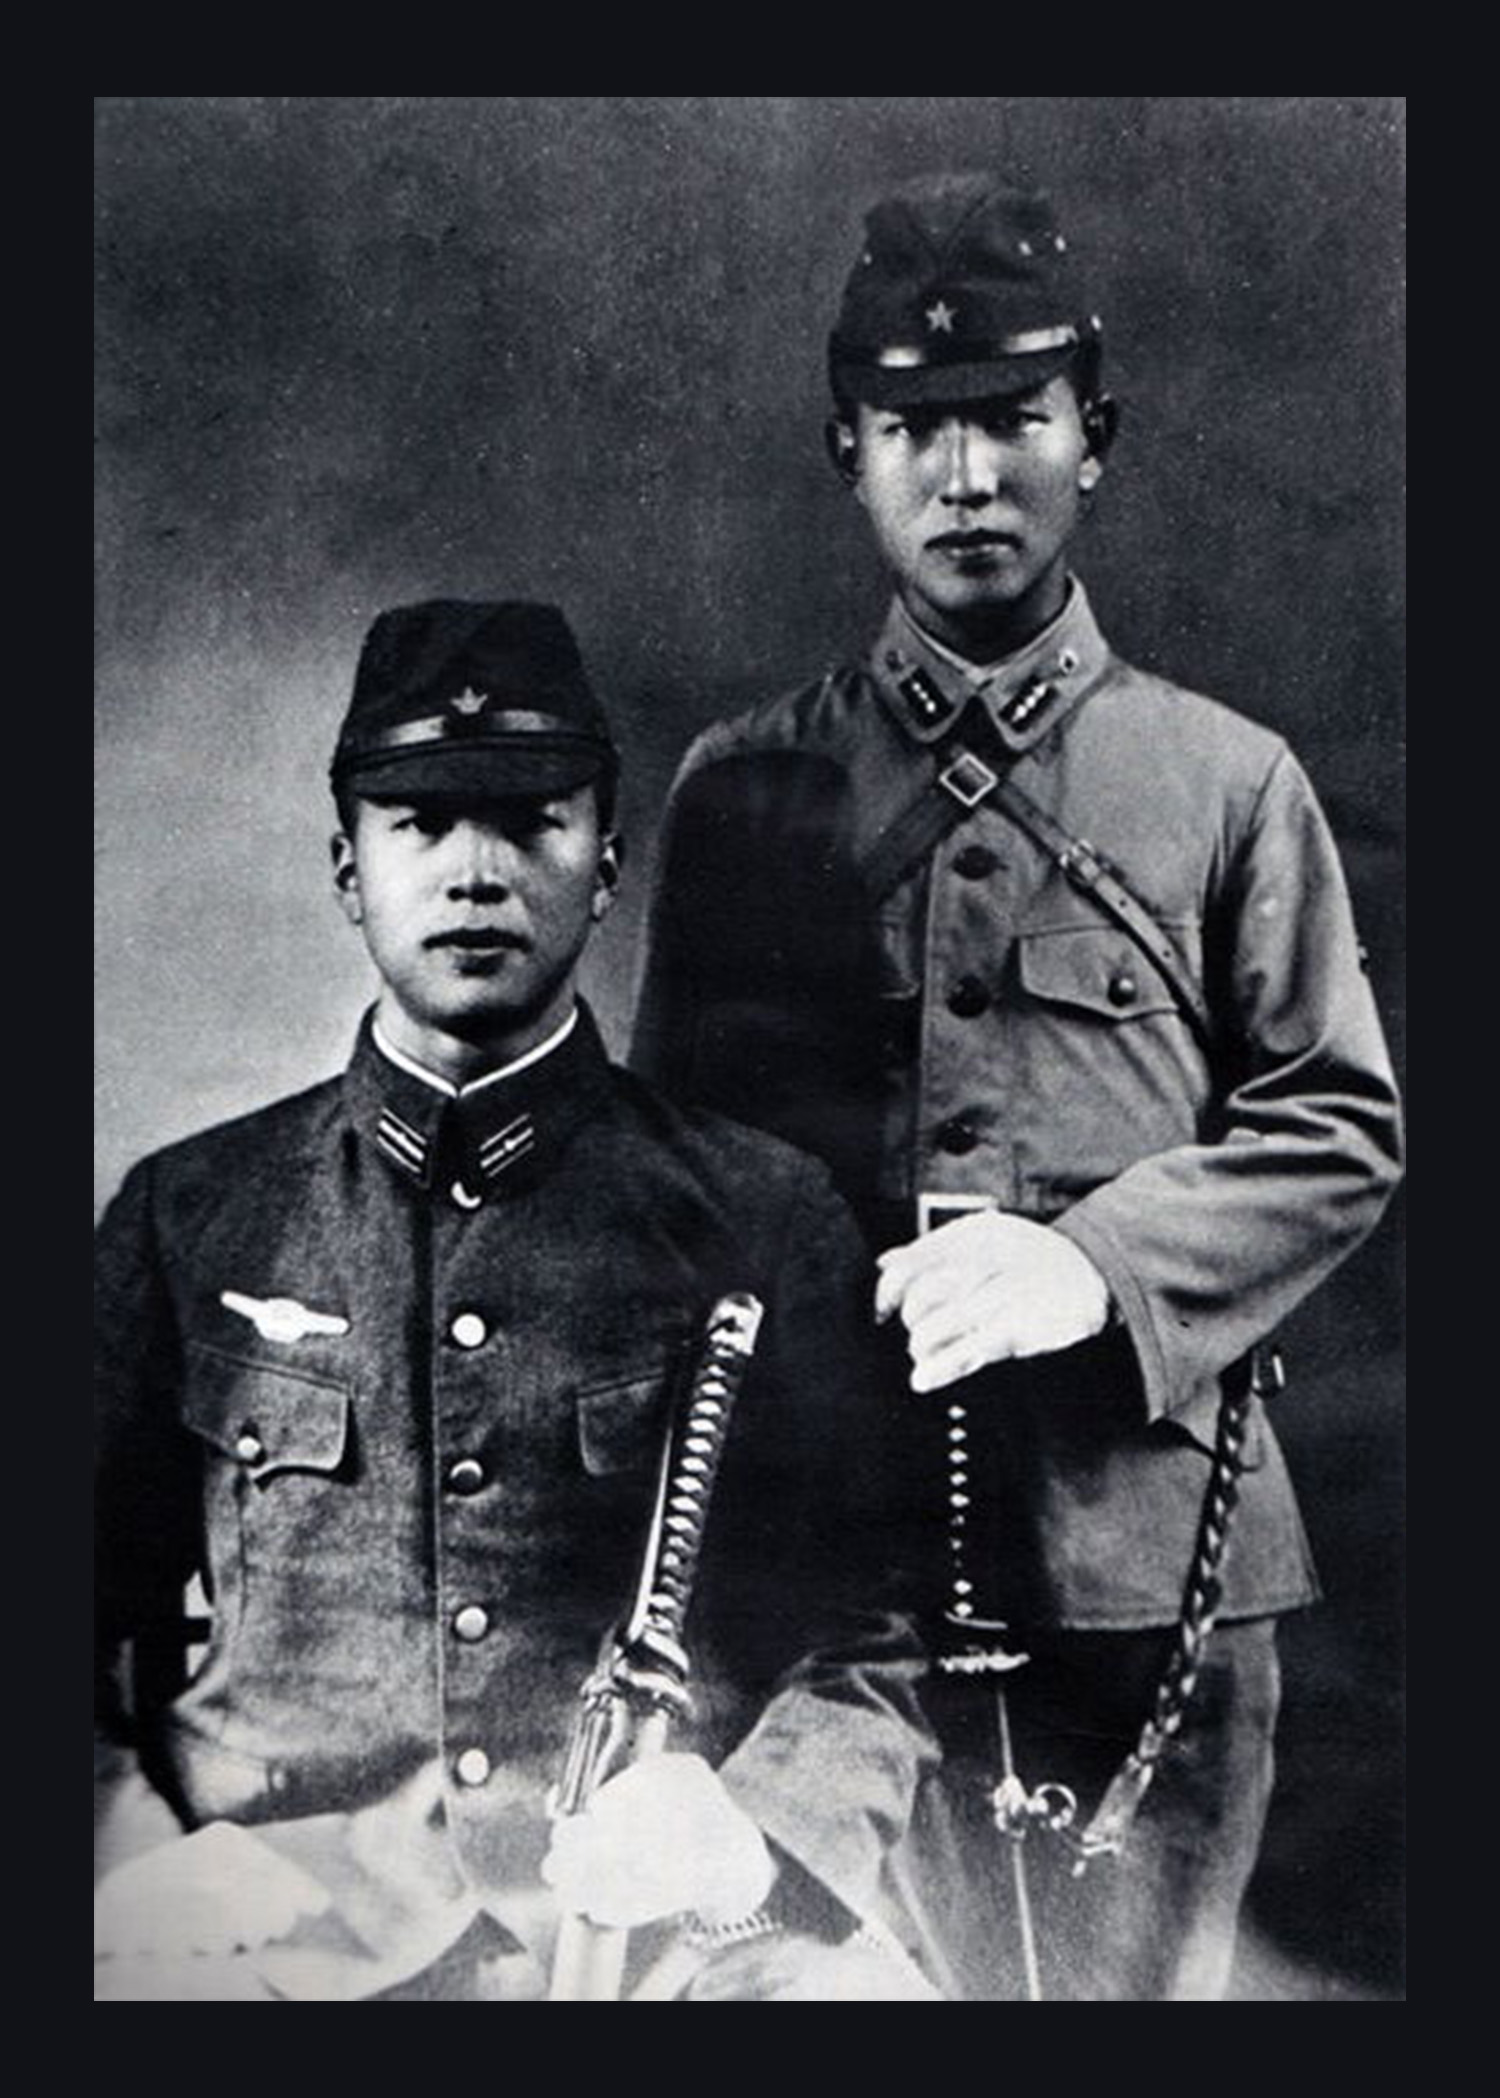 Famous Japanese “straggler” Hiroo Onoda (right) and his younger brother Shigeo Onoda, circa 1944.